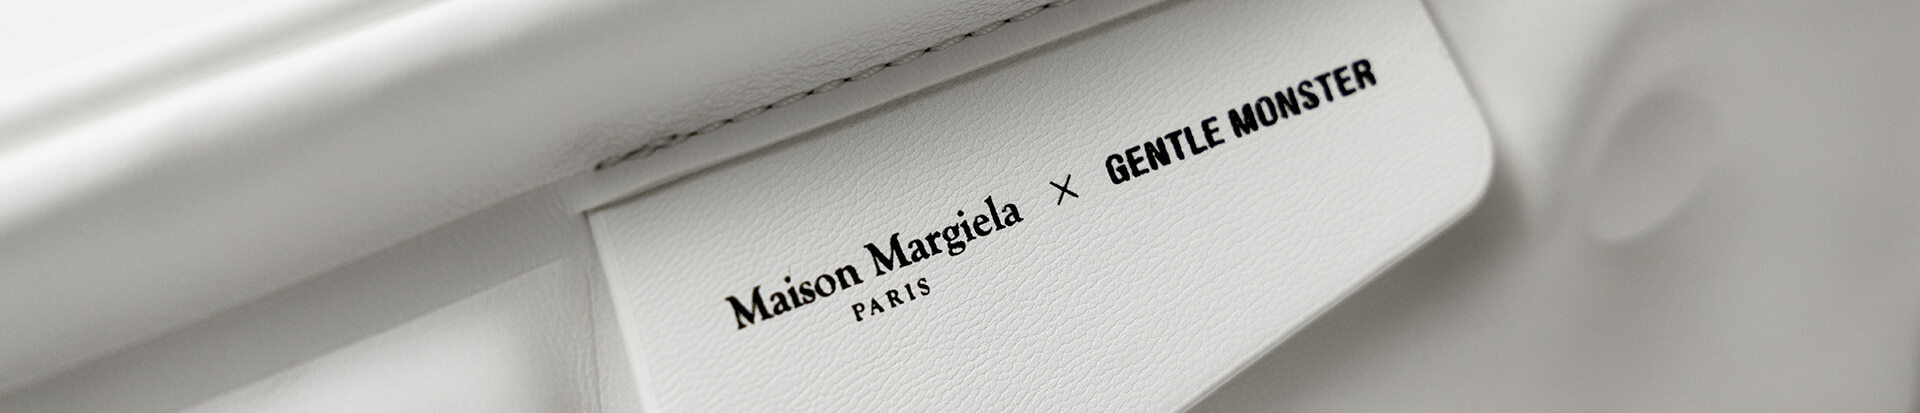 The Maison Margiela x Gentle Monster collection